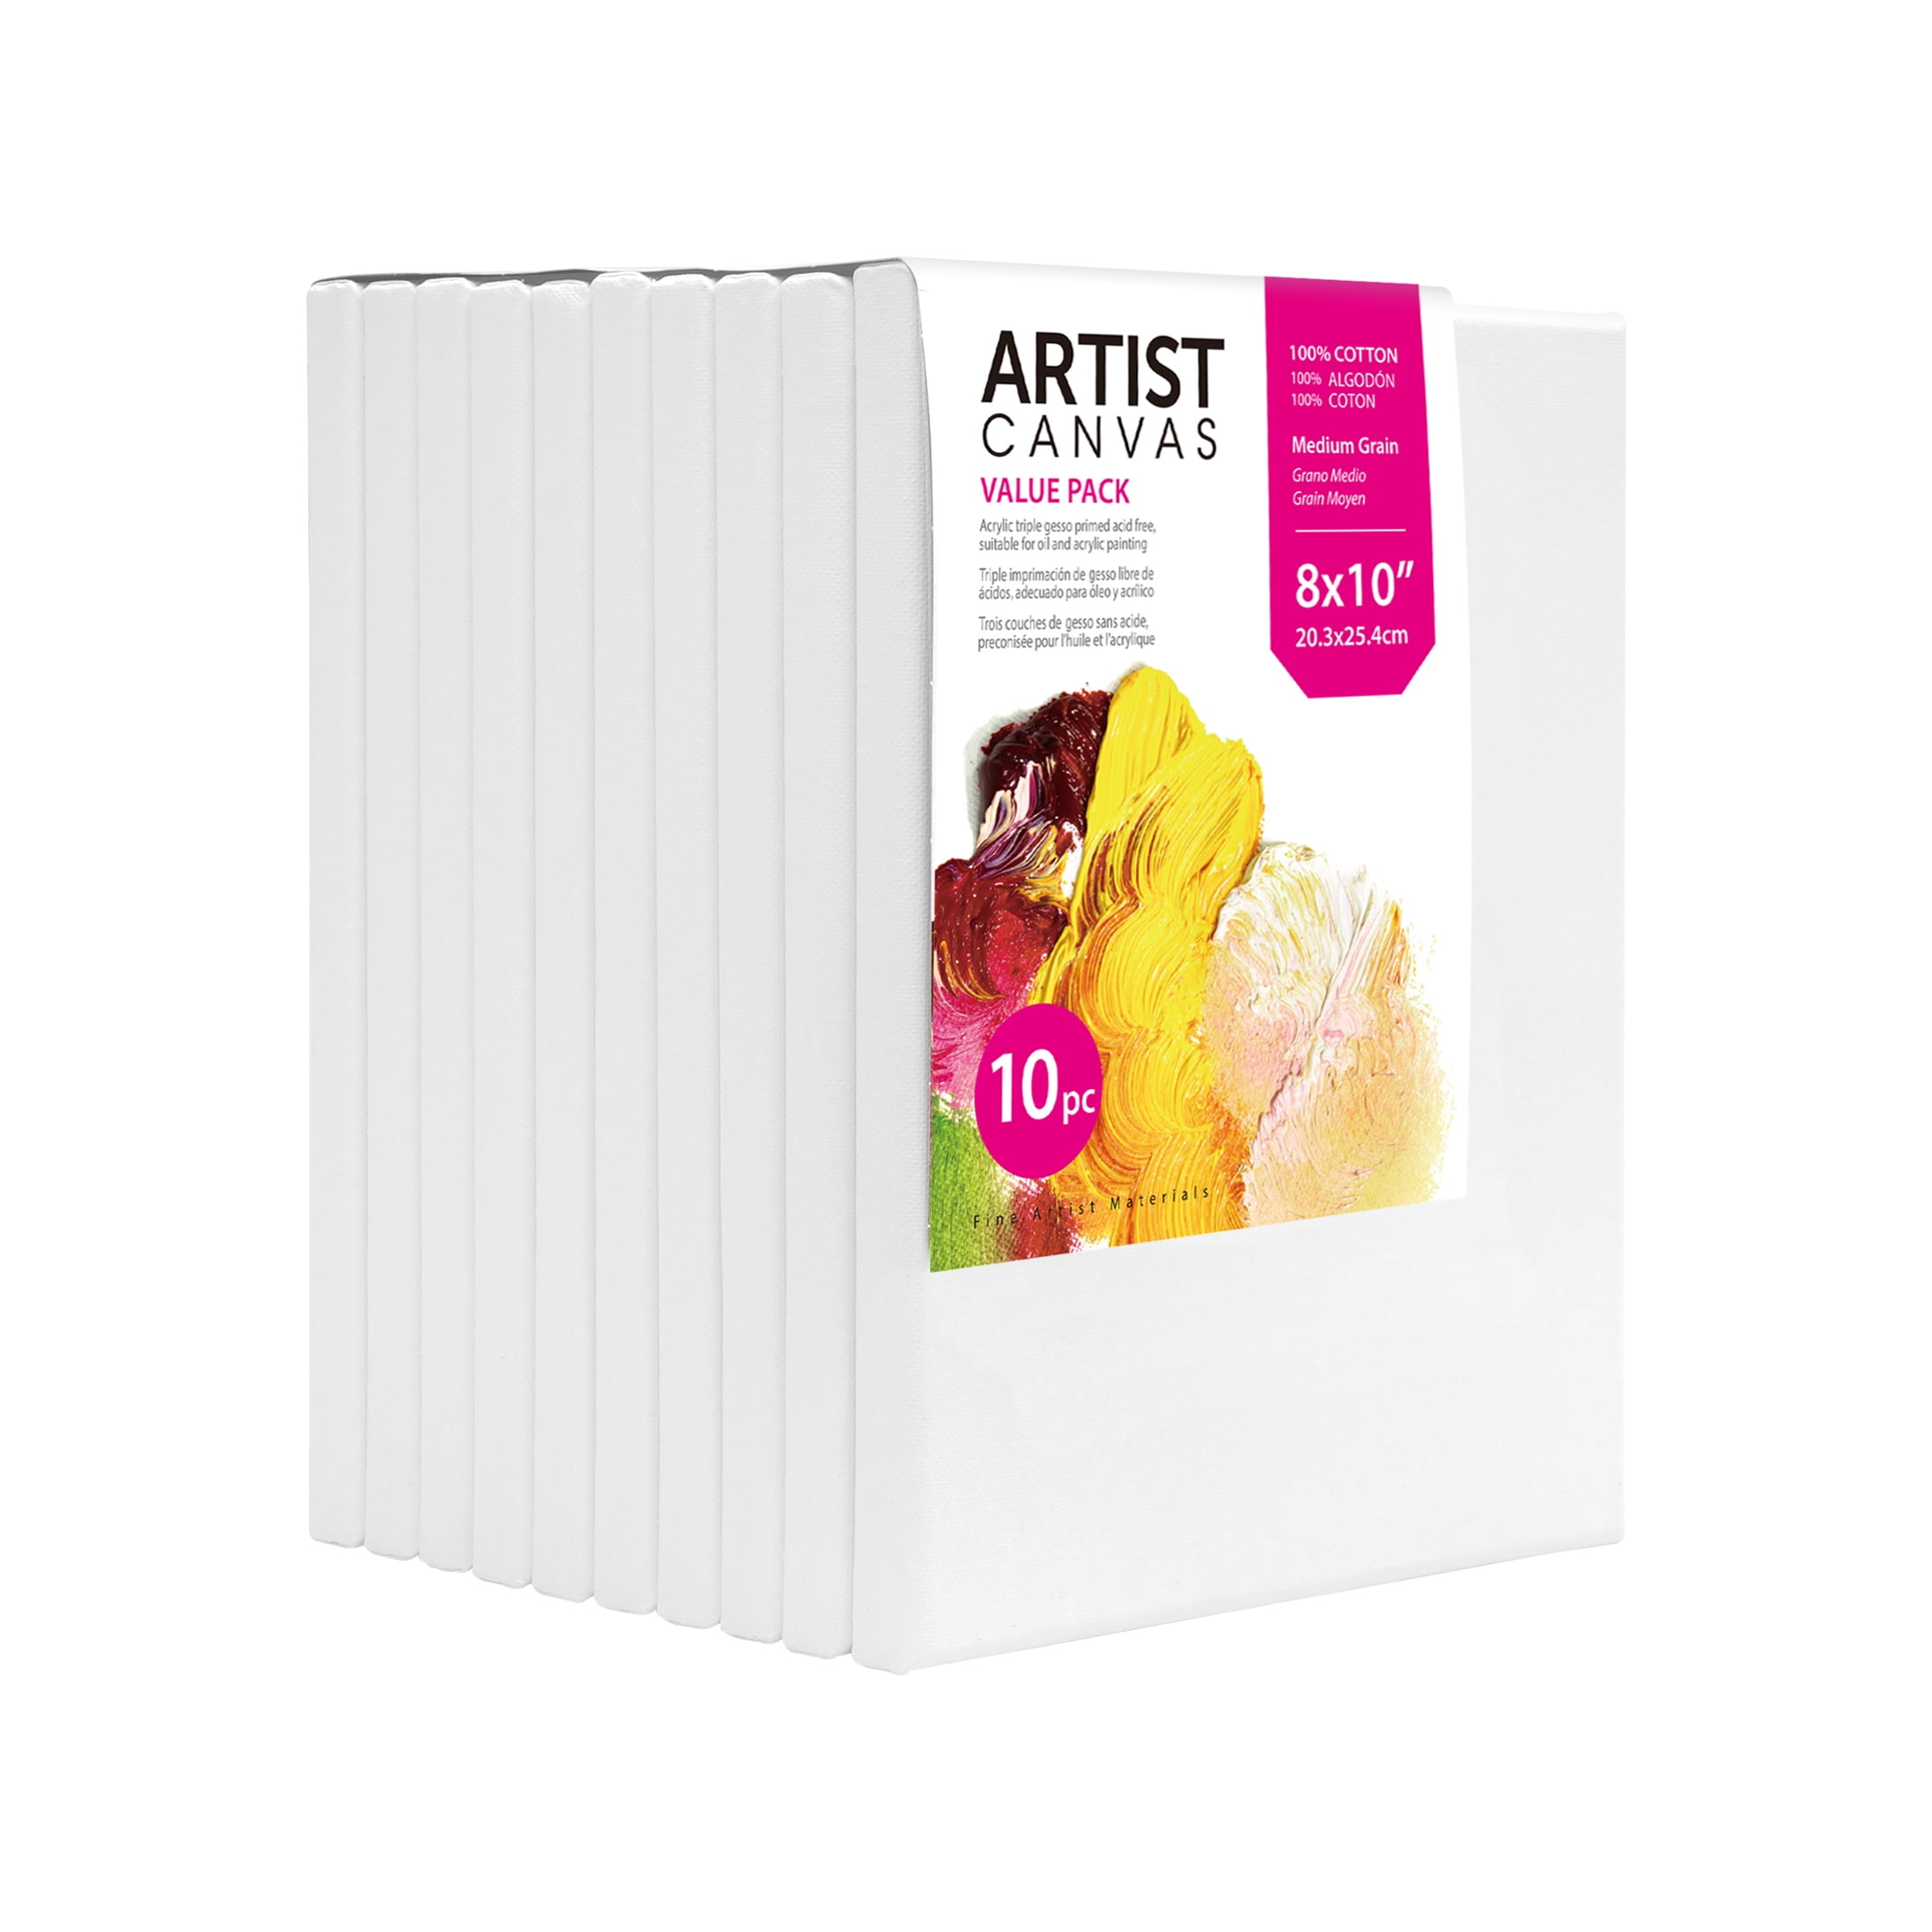 15 Pieces Canvas Boards for Painting Painting Canvas Panels Multipack  Cotton Artist Canvas Boards Round, Square, Heart for Acrylic, Oil Paint,  Wet or